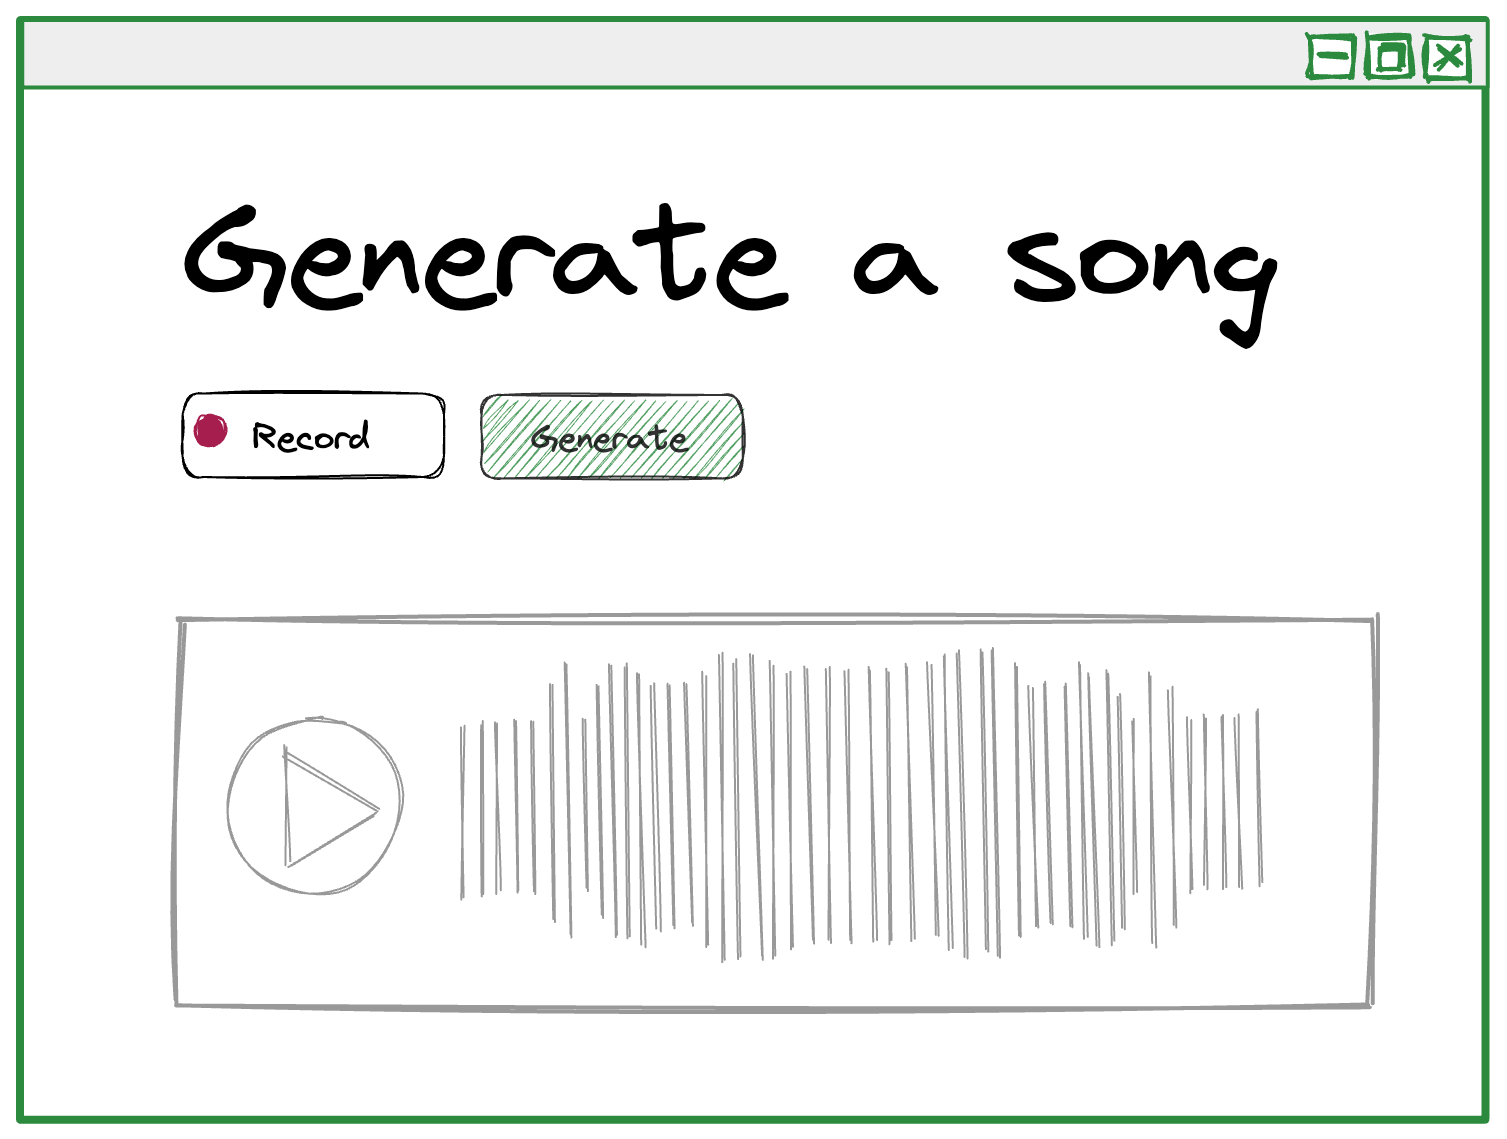 sketch of a user interface titled Generate a song with a button to Record and a button to Generate, with an inactive play button and audio waveform at the bottom of the screen